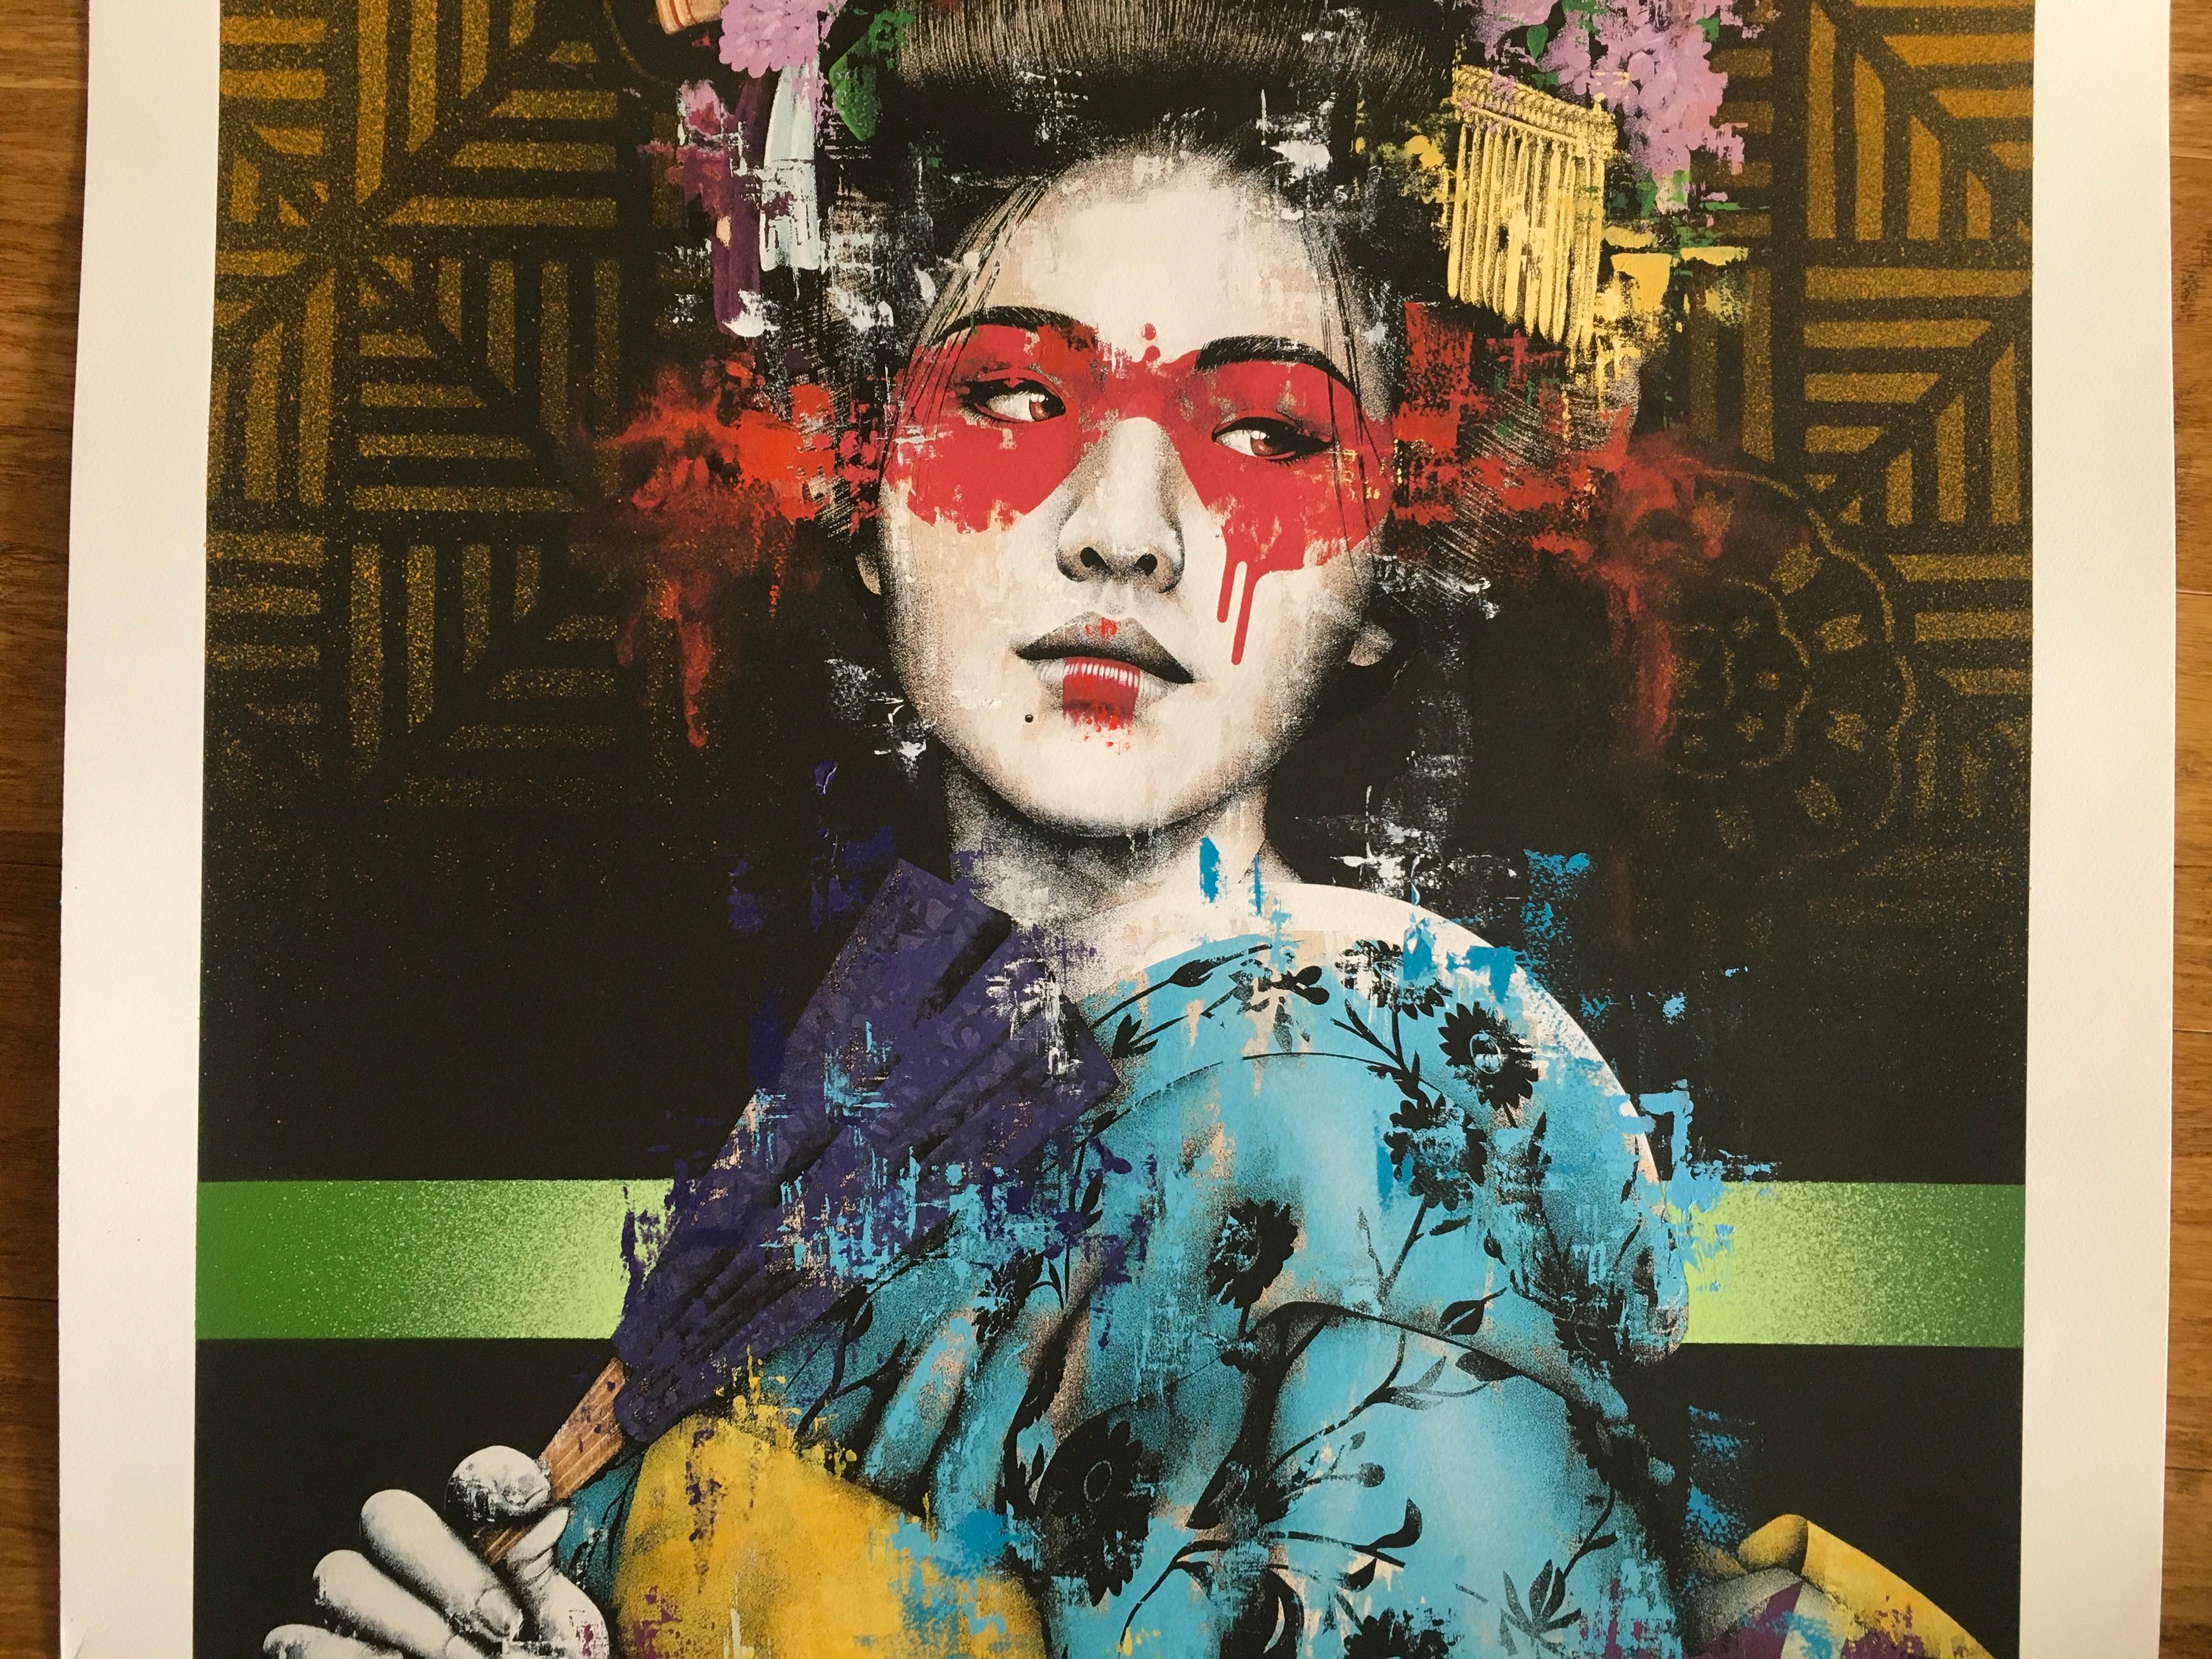 Sansho (2019), Unique Archival Pigment Print, Very Rare Edition of only 2 - Black Figurative Print by Fin DAC